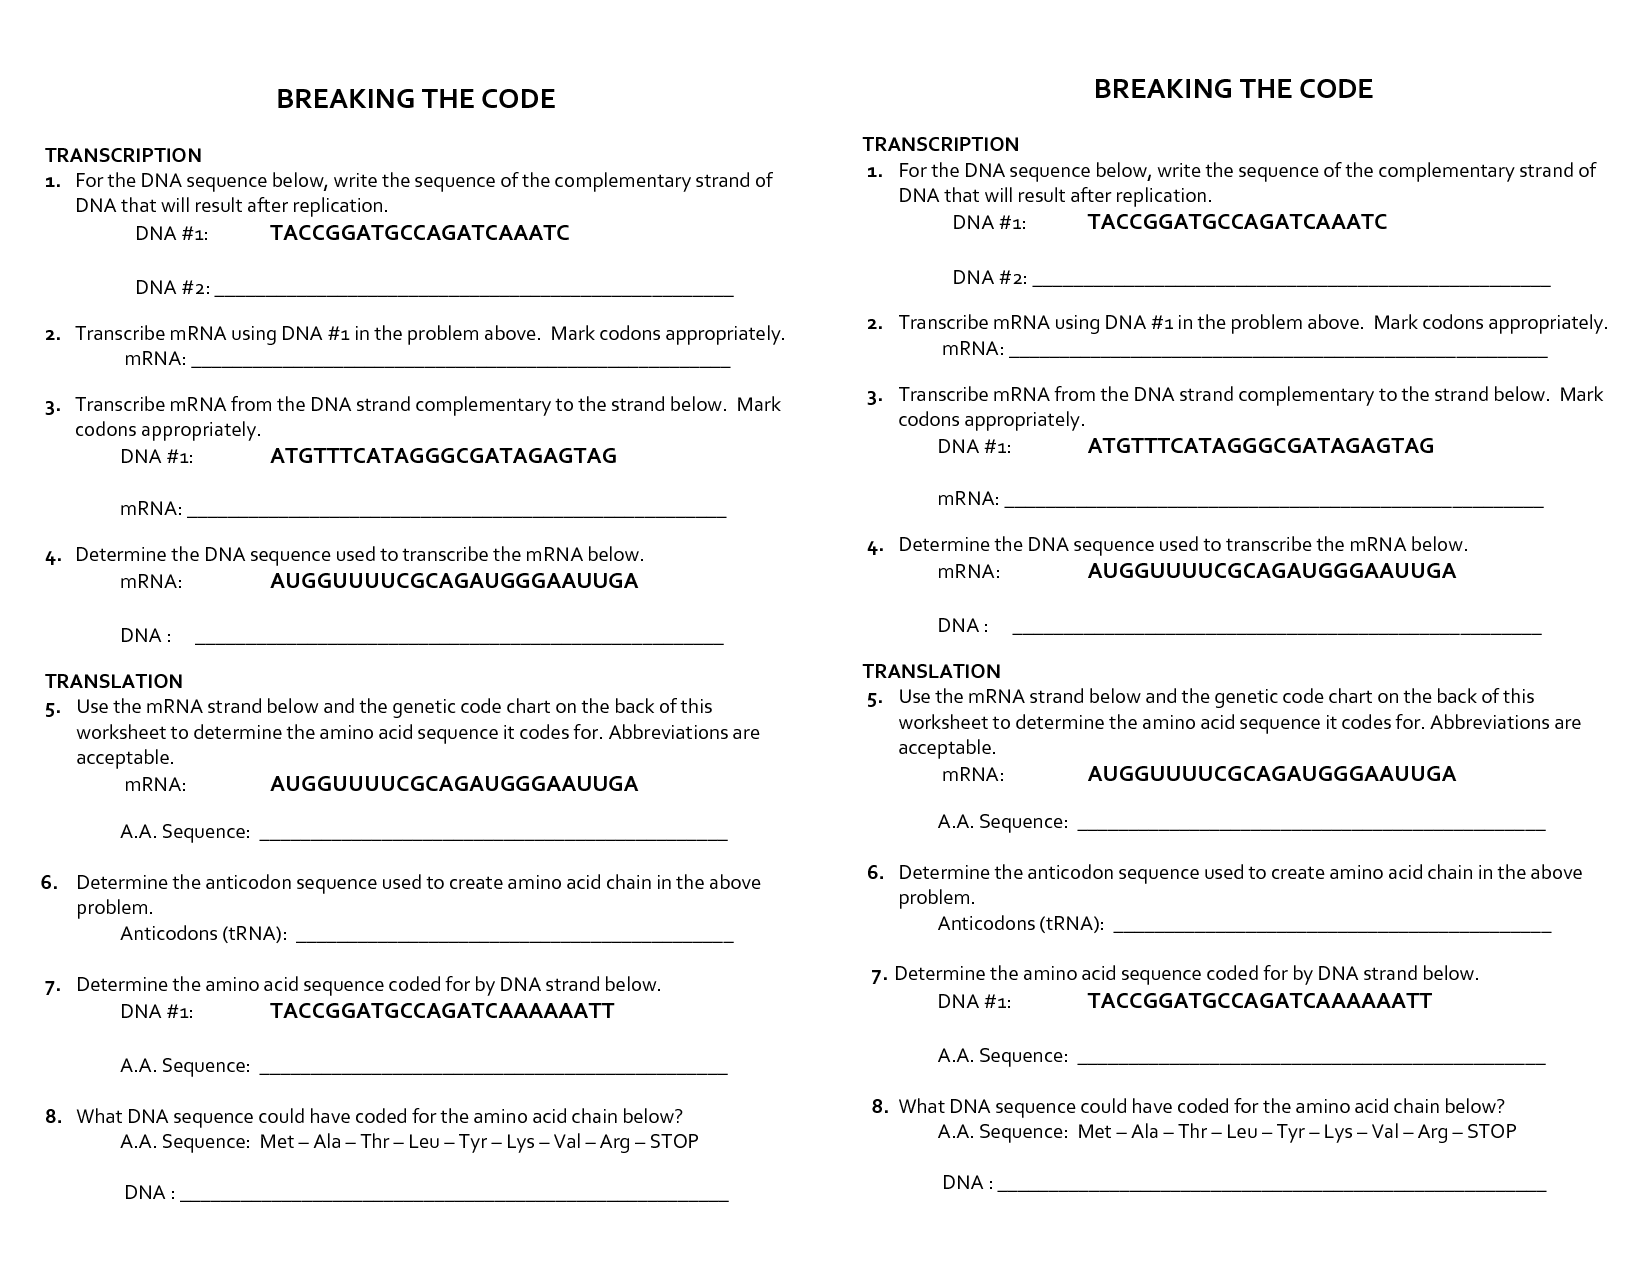 breaking-the-code-worksheet-answers